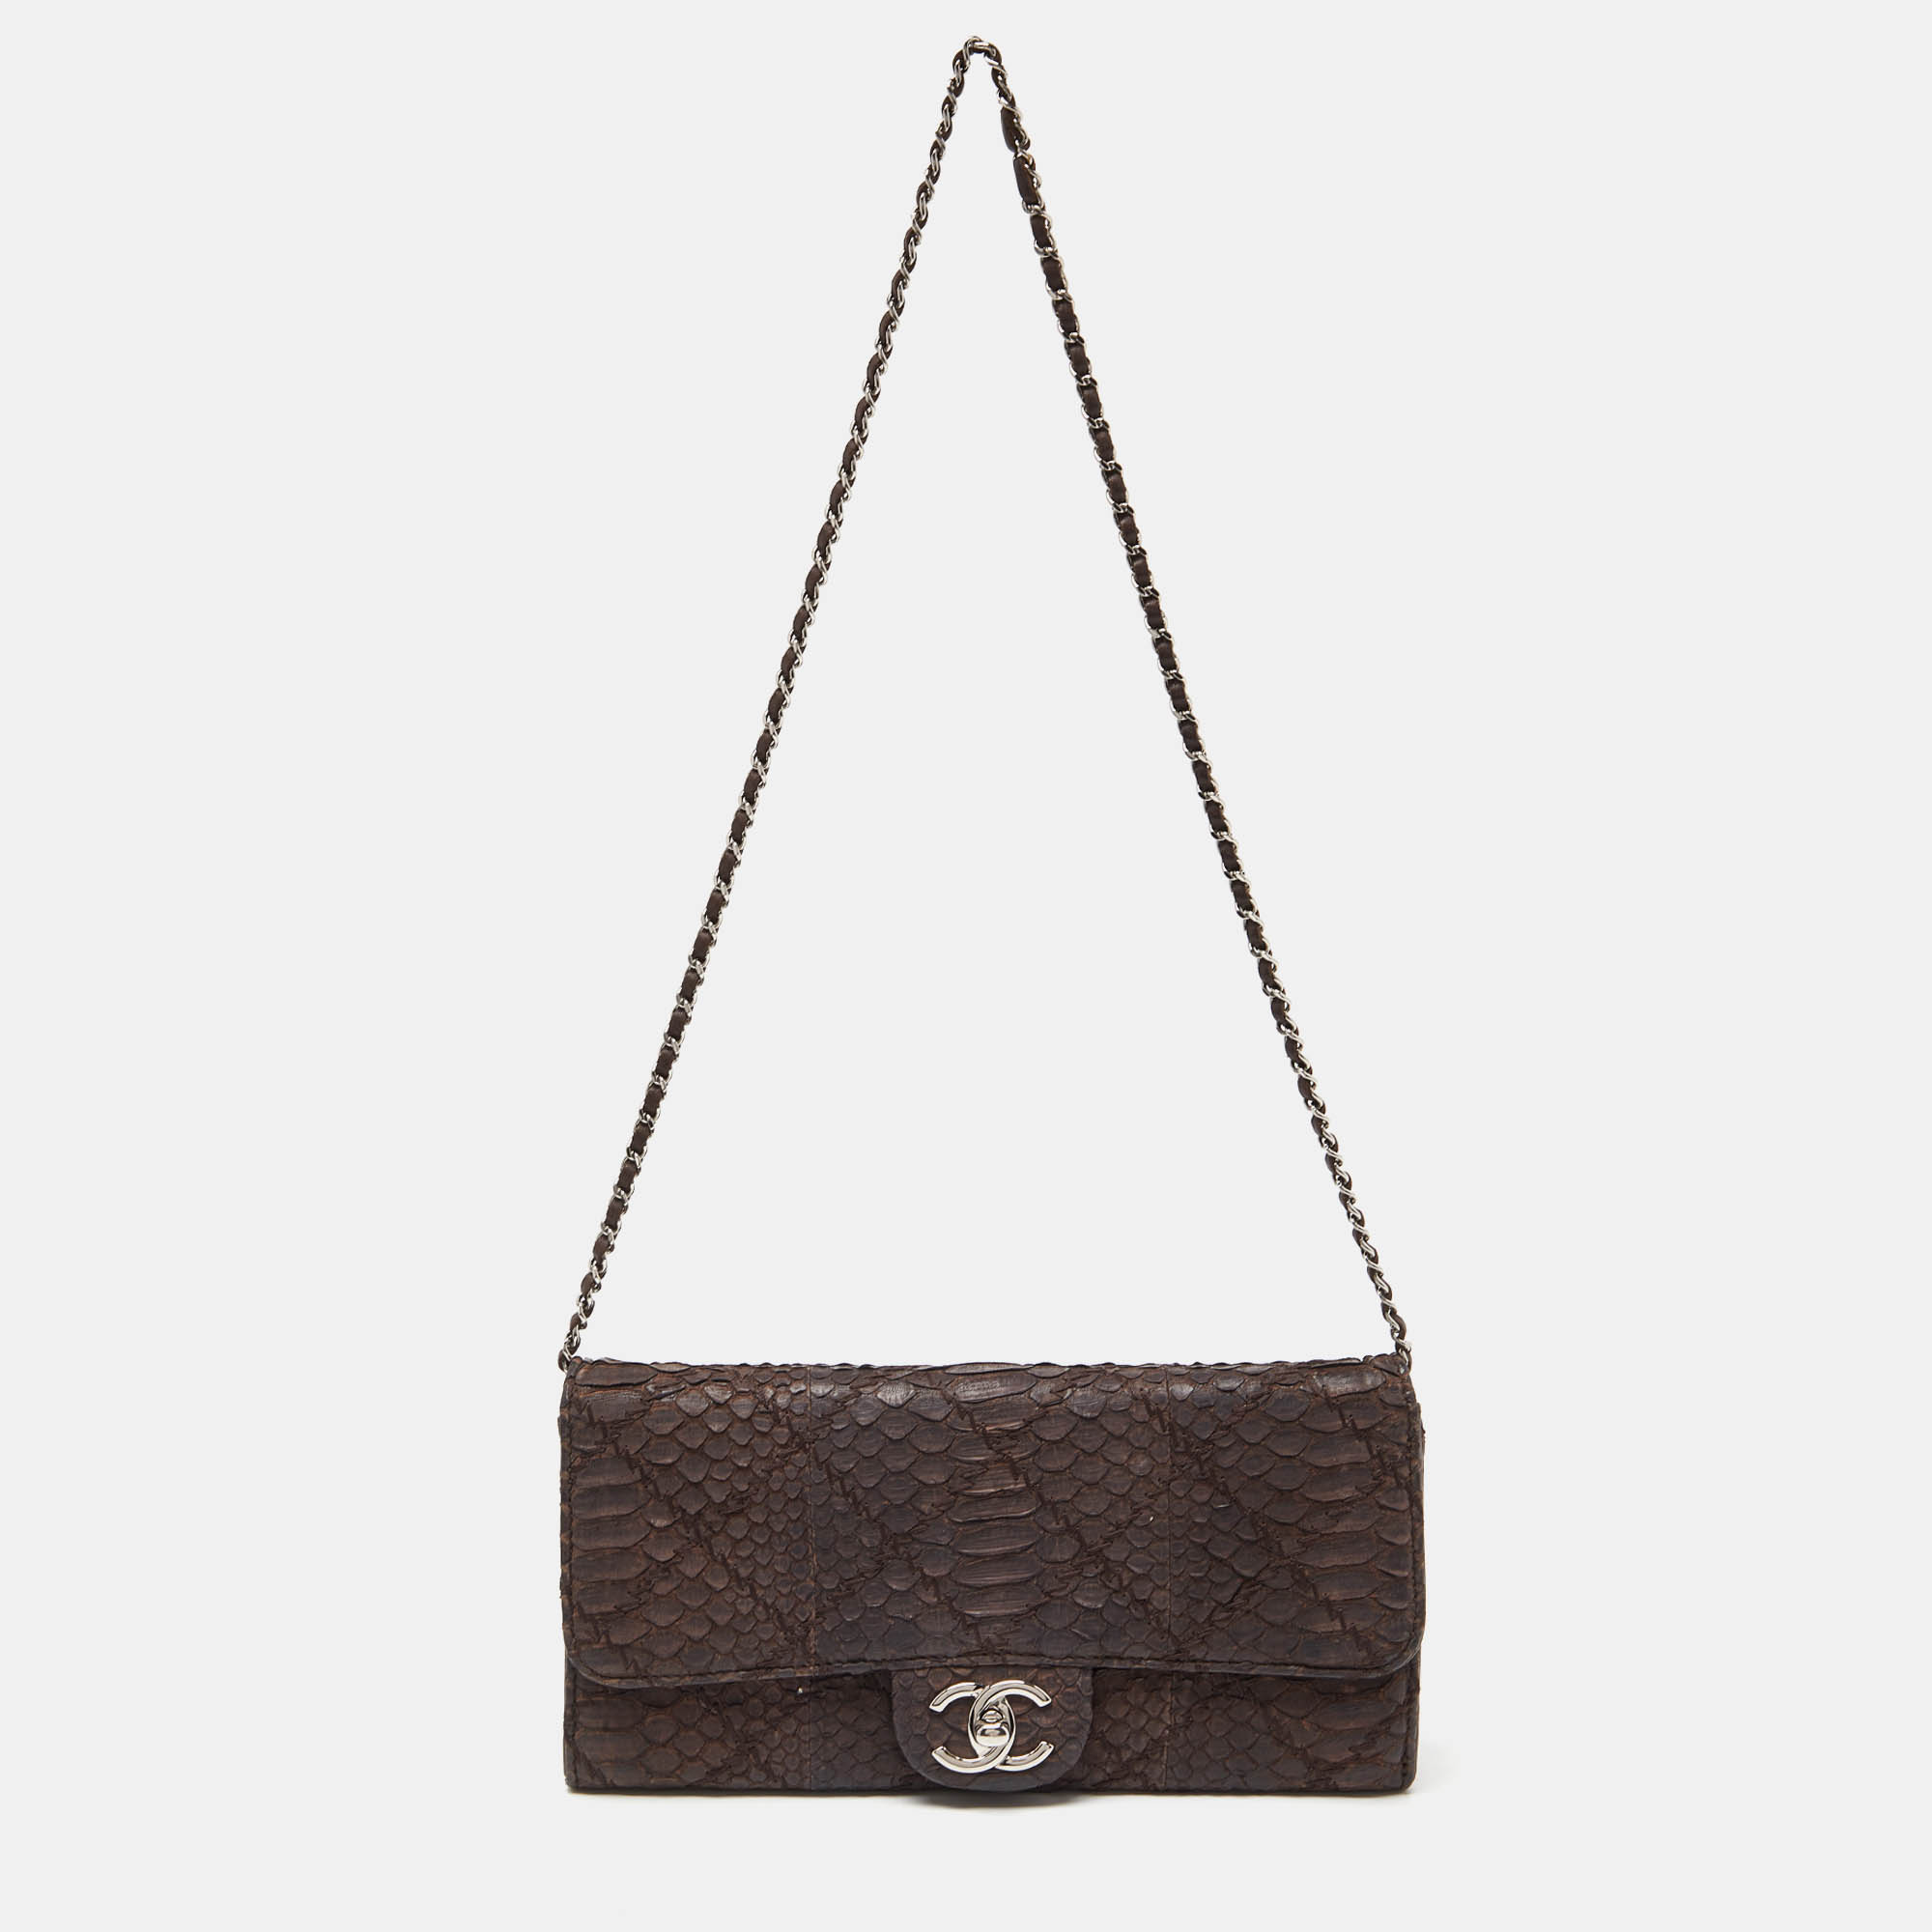 Chanel brown quilted python ultimate stitch chain clutch